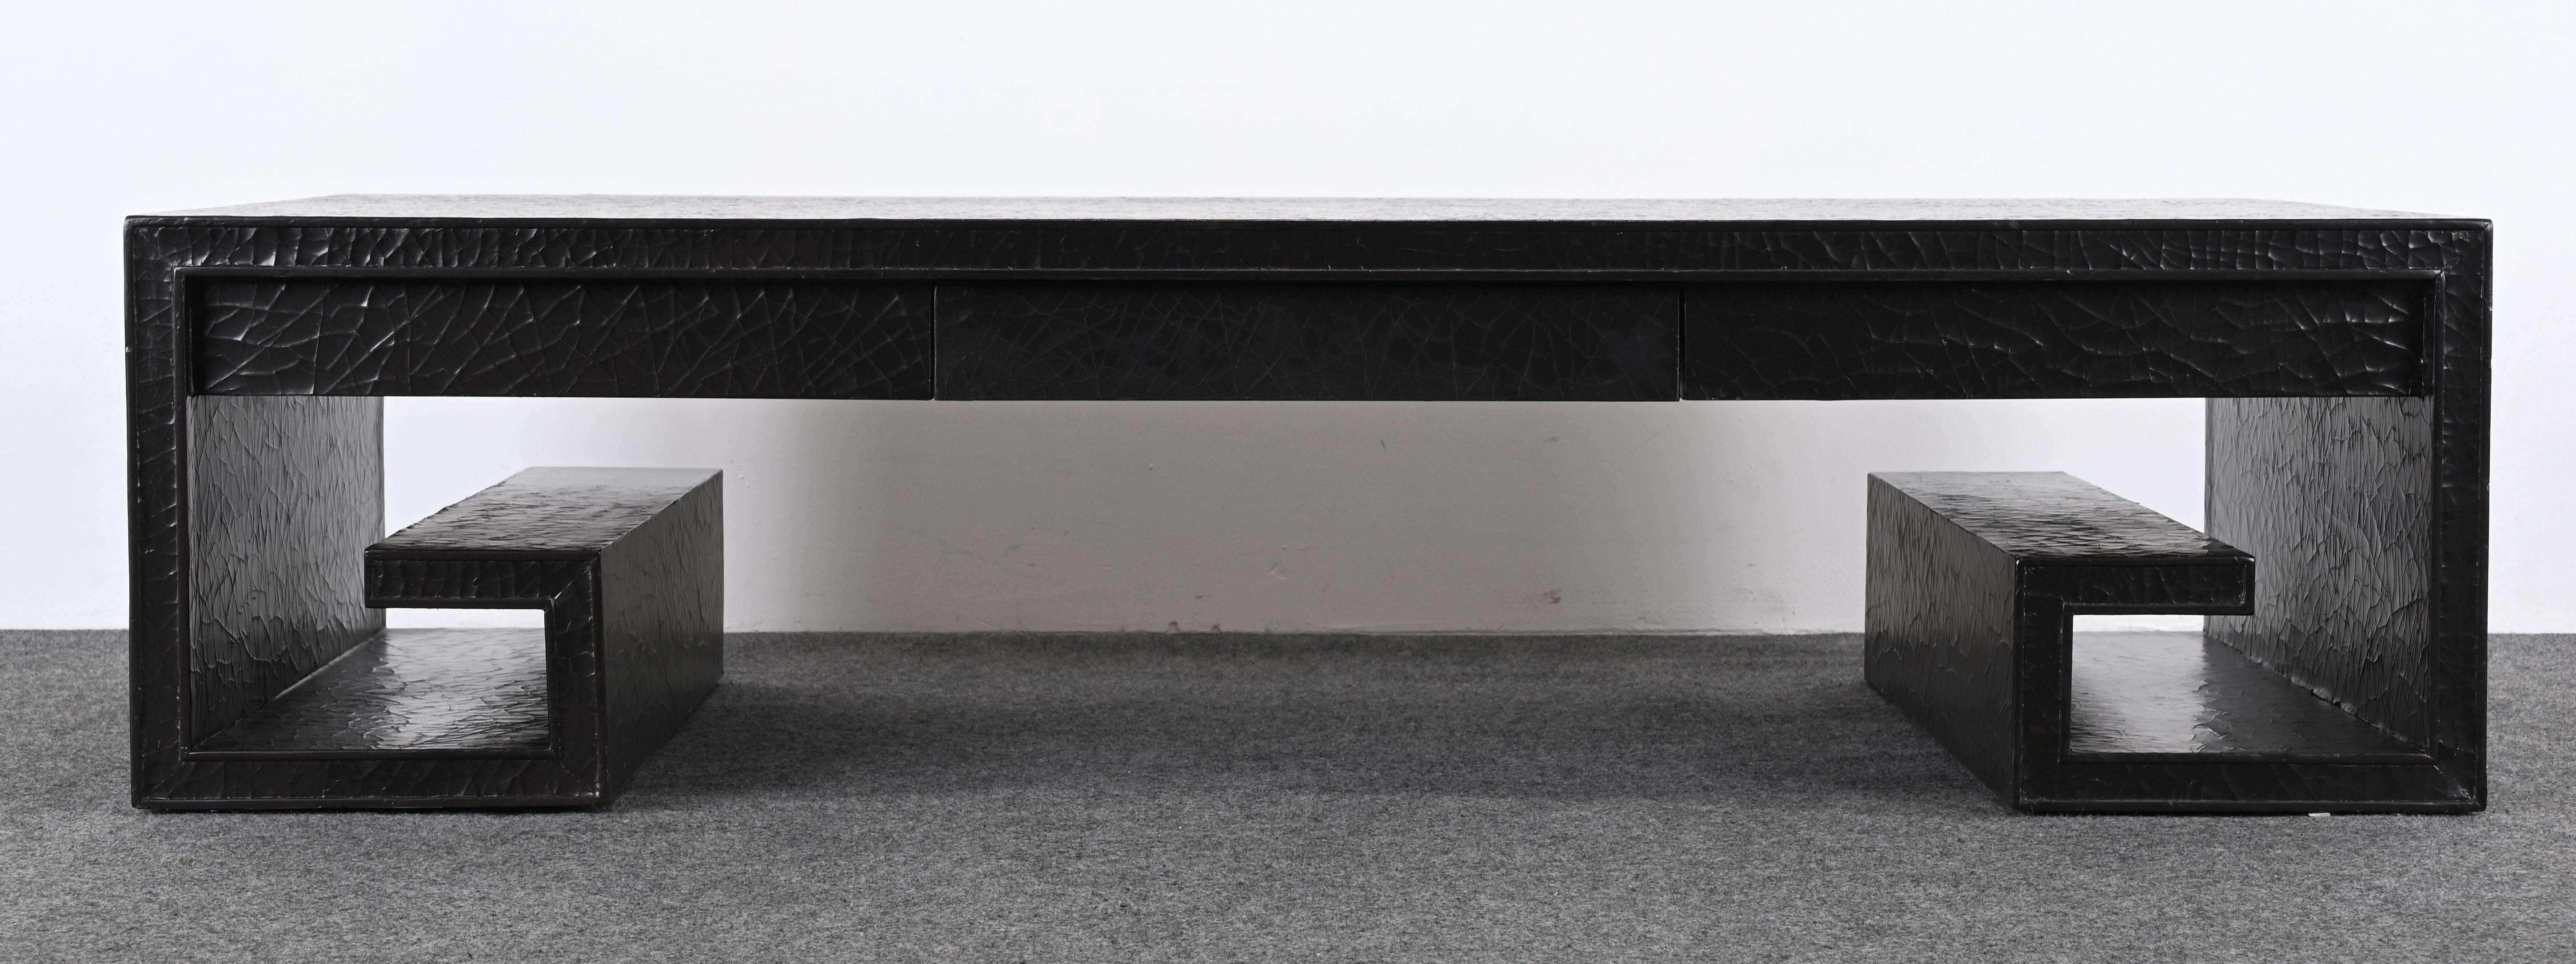 A monumental stunning black lacquer-painted coffee or cocktail table designed by Thomas Pheasant for Baker. The Greek Key motif adds a nice design element. The coffee table also has two drawers for ample storage. The Baker label is inside the drawer